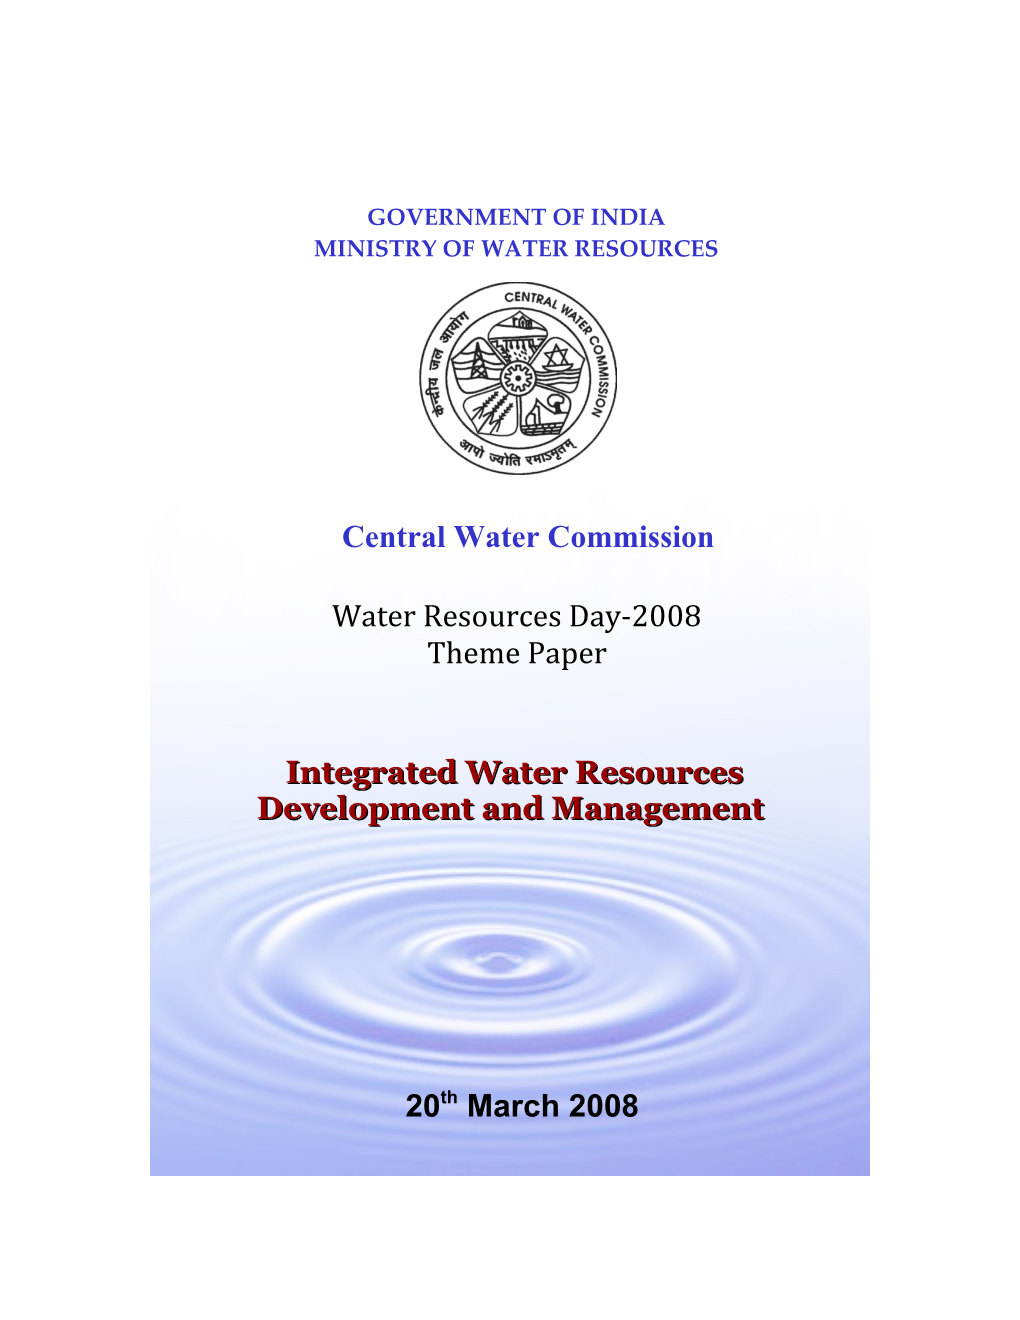 Water Resources Day - 2008